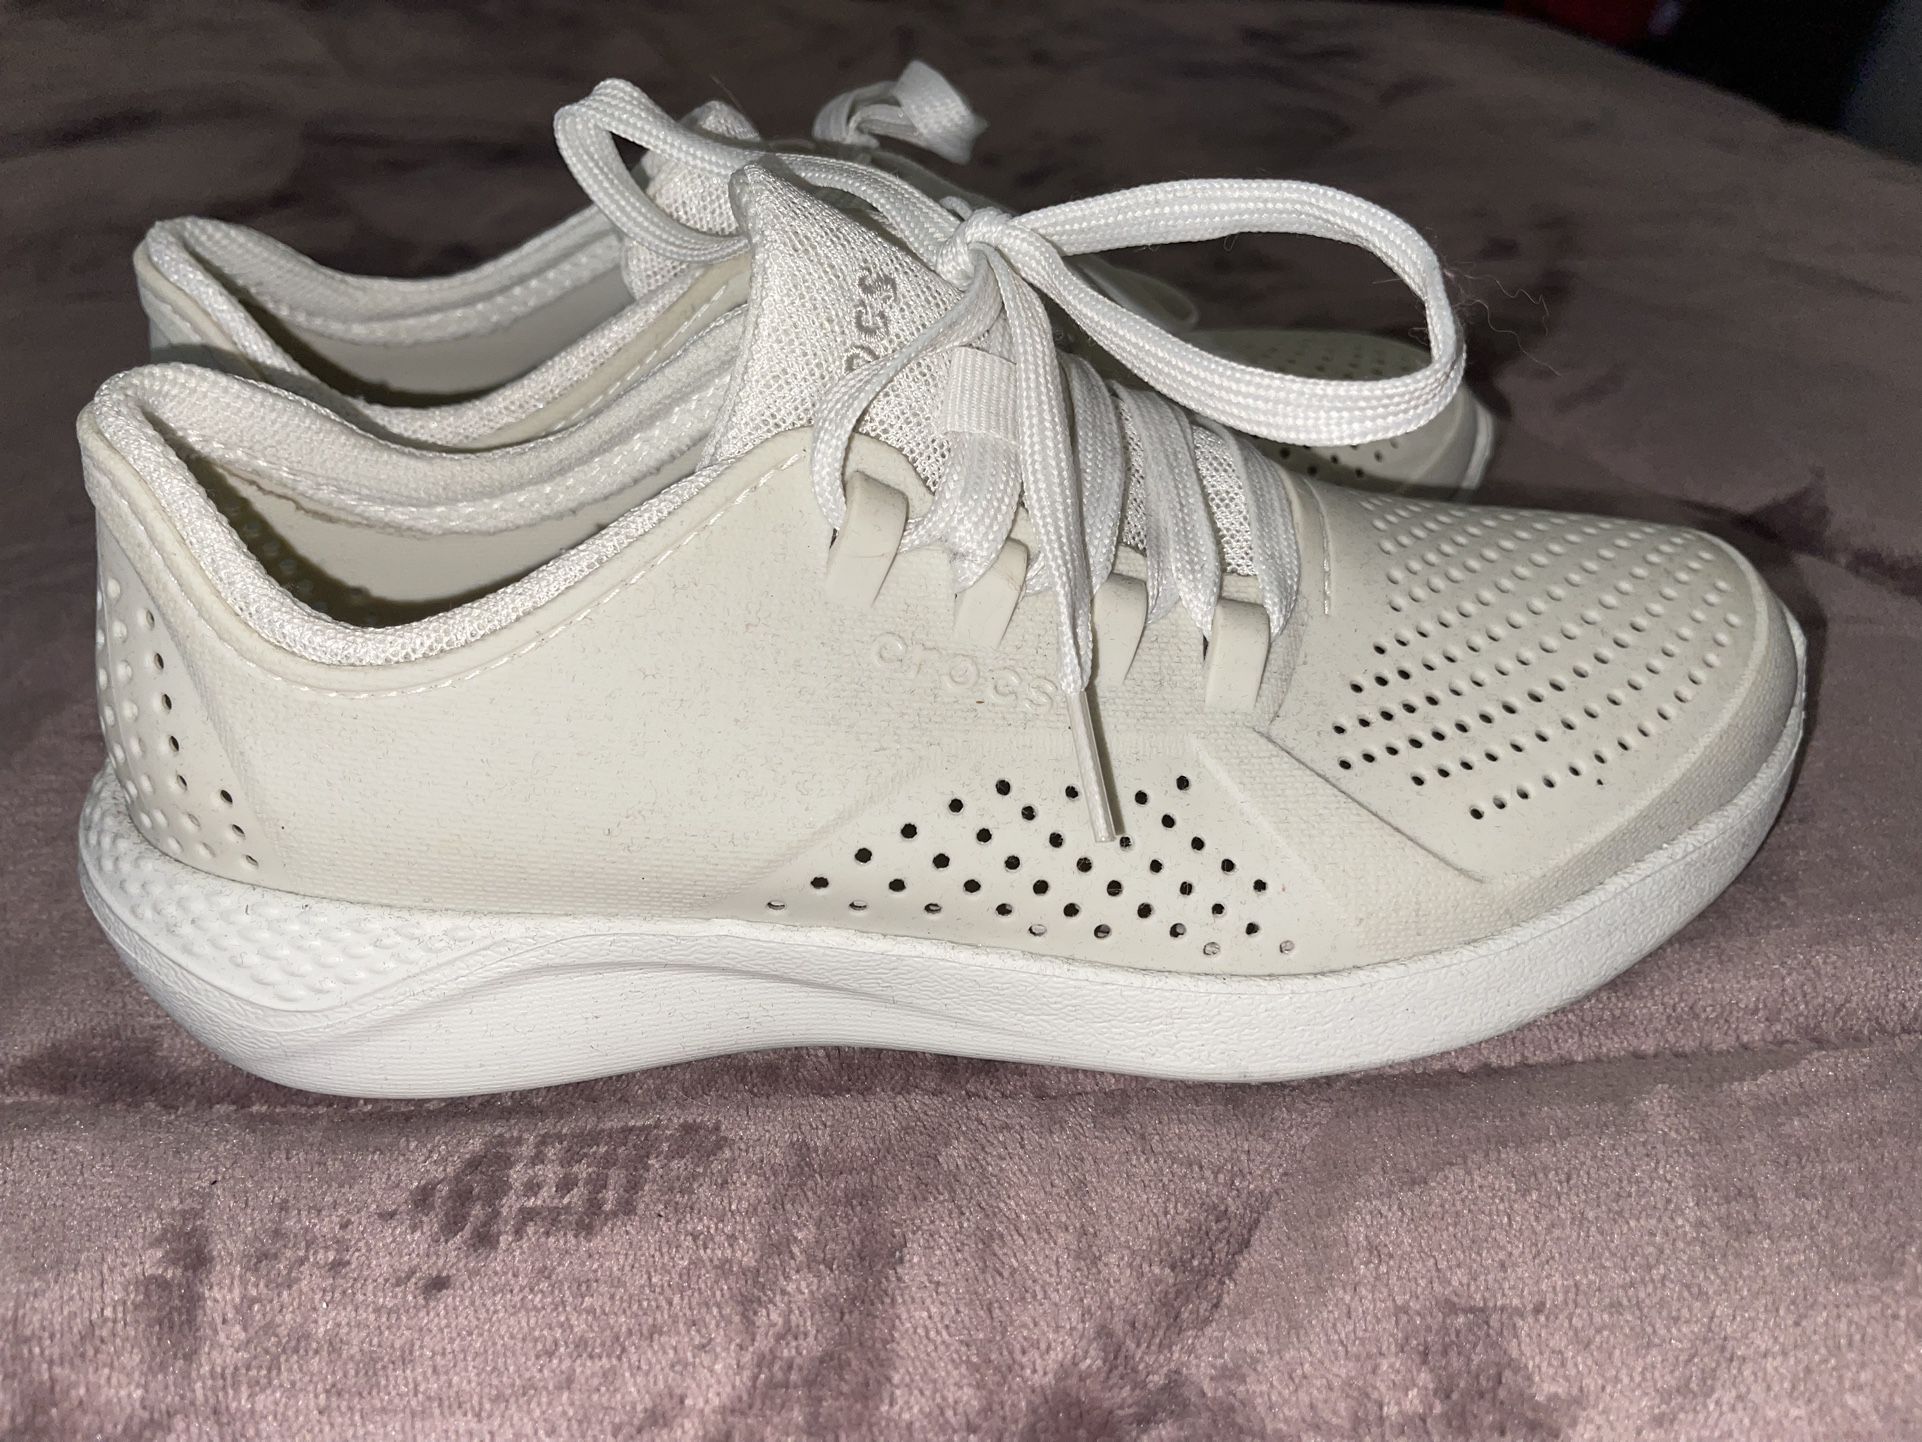 Crocs Women's Literide Pacer Lace-up Sneakers for Sale in Sacramento, CA -  OfferUp